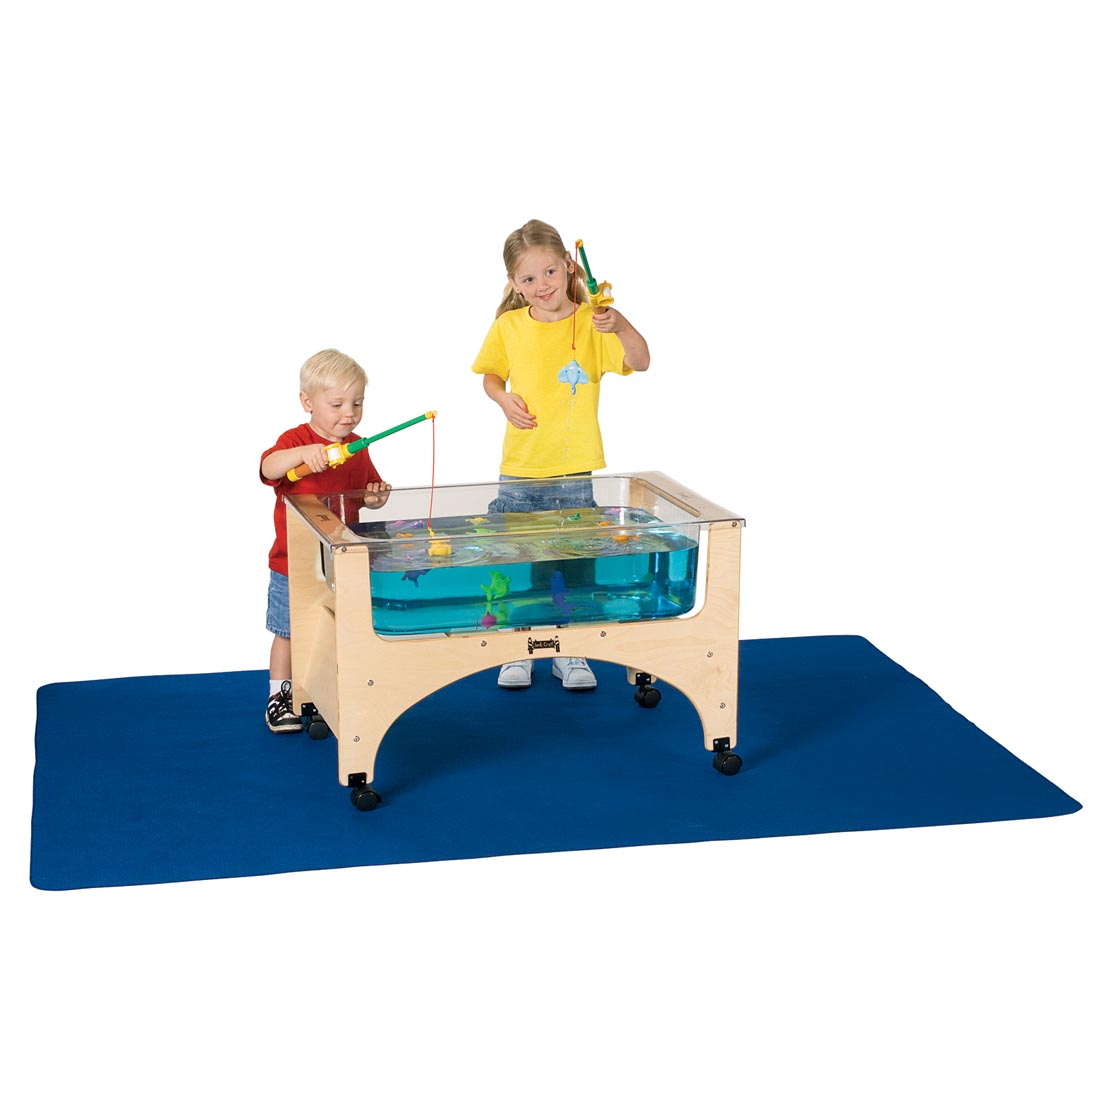 Children "fishing" from a sensory table while standing on the Sensory Table Mat